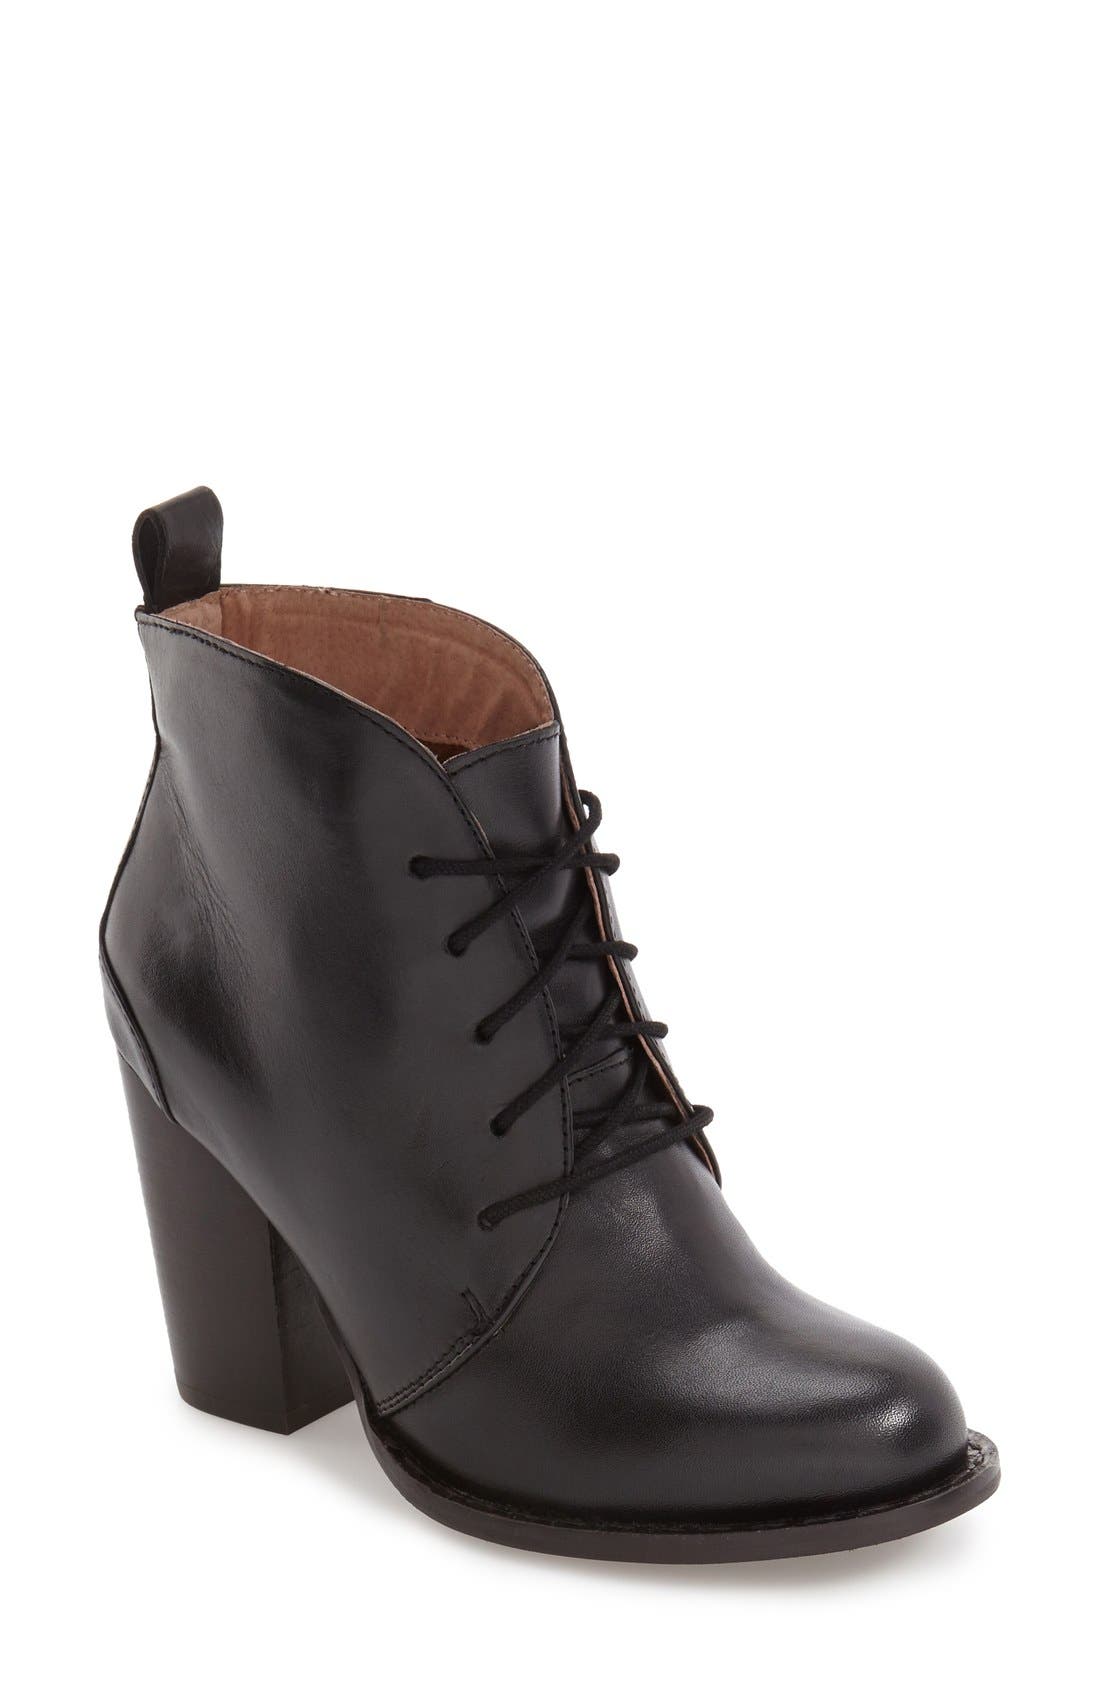 seychelles lace up boots